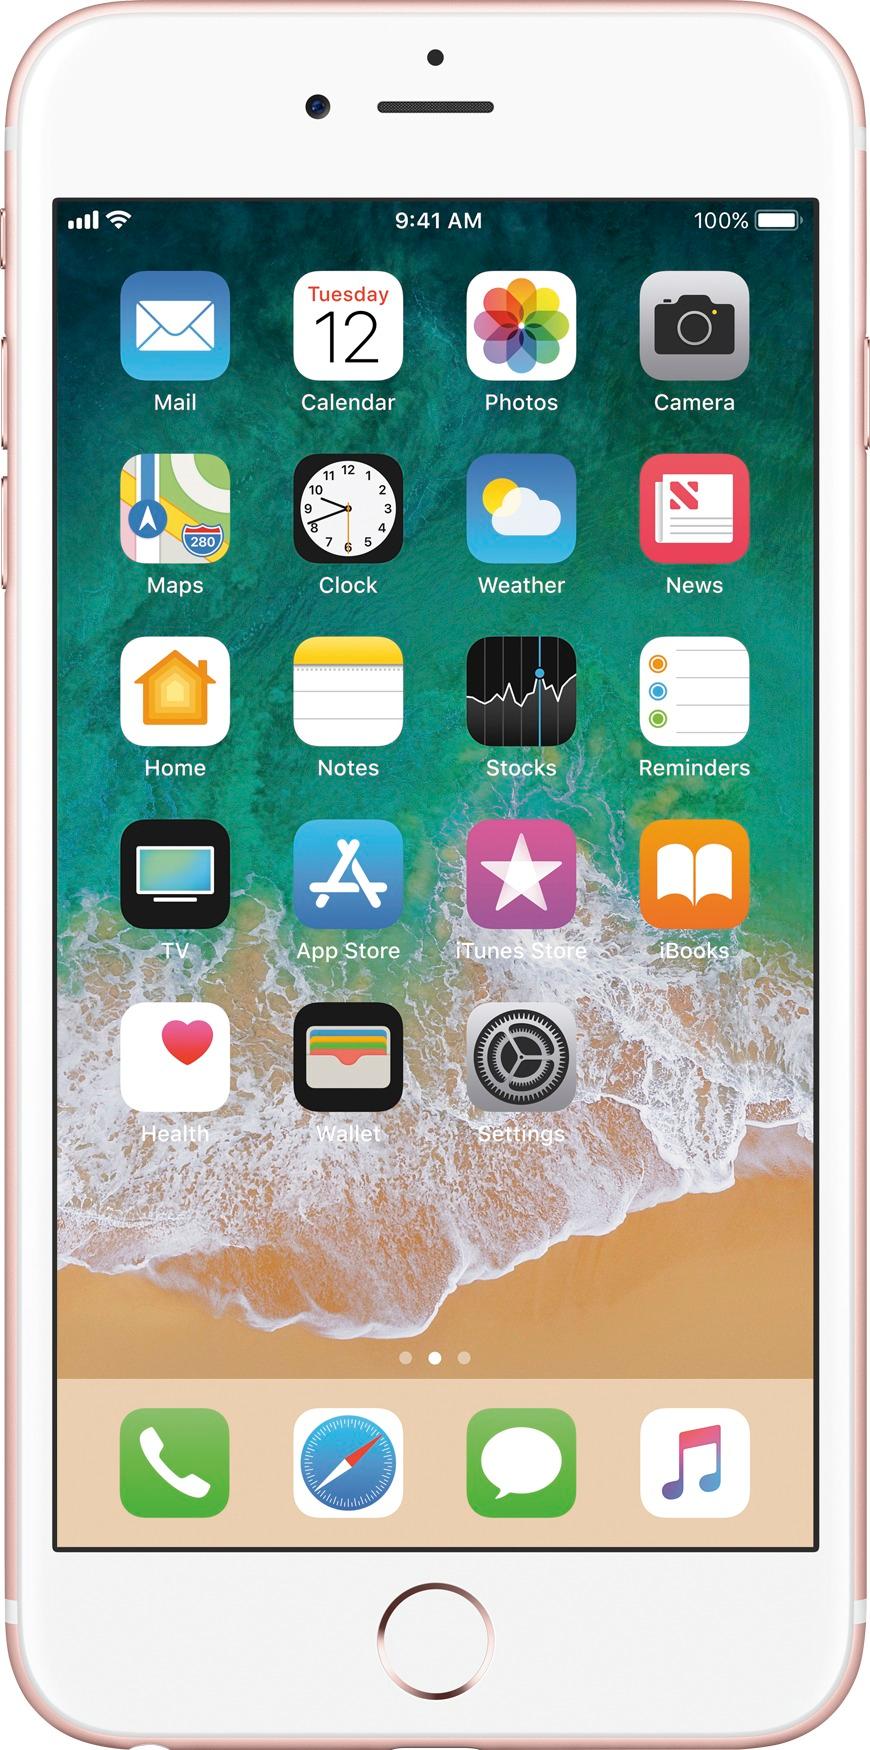 Apple iPhone 6s 32GB Unlocked GSM 4G LTE Dual-Core Phone w/ 12 MP Camera -  Rose Gold (Used)